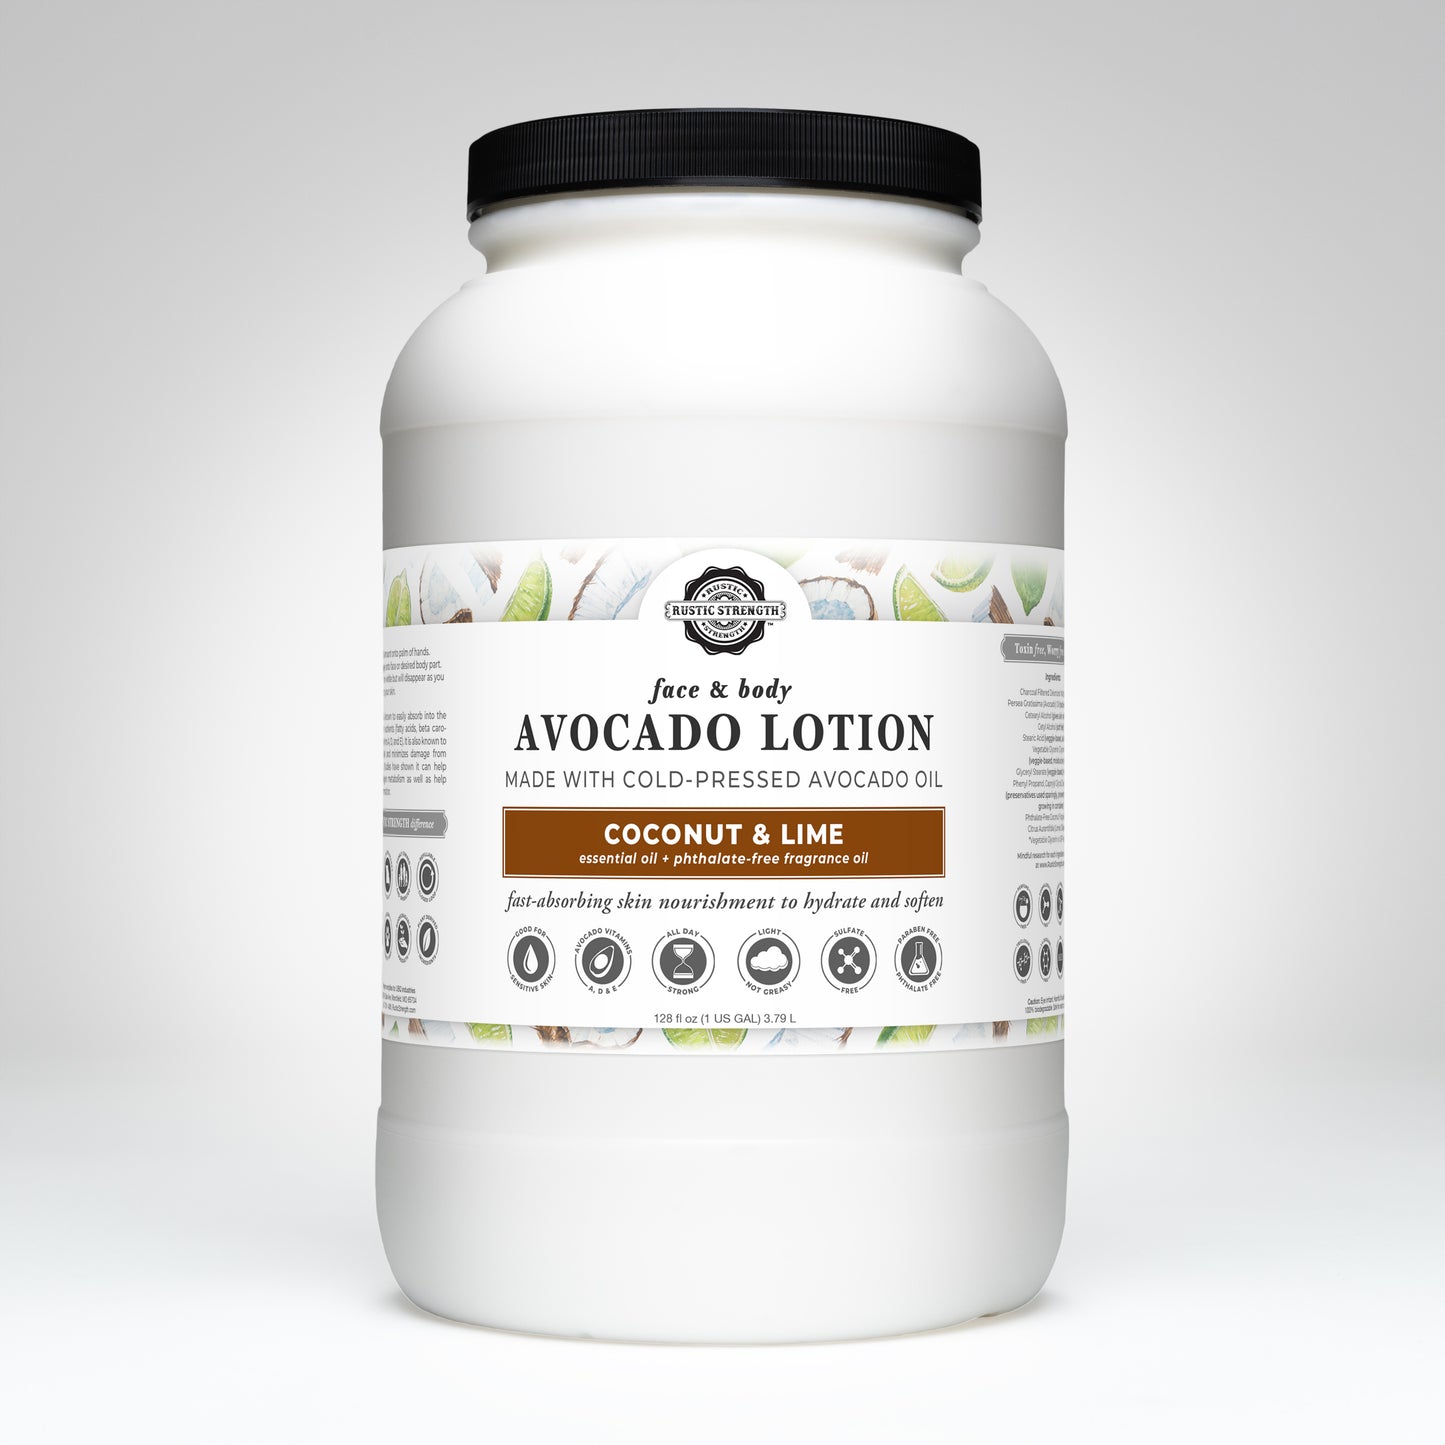 Face & Body Avocado Lotion - Our Popular Scents